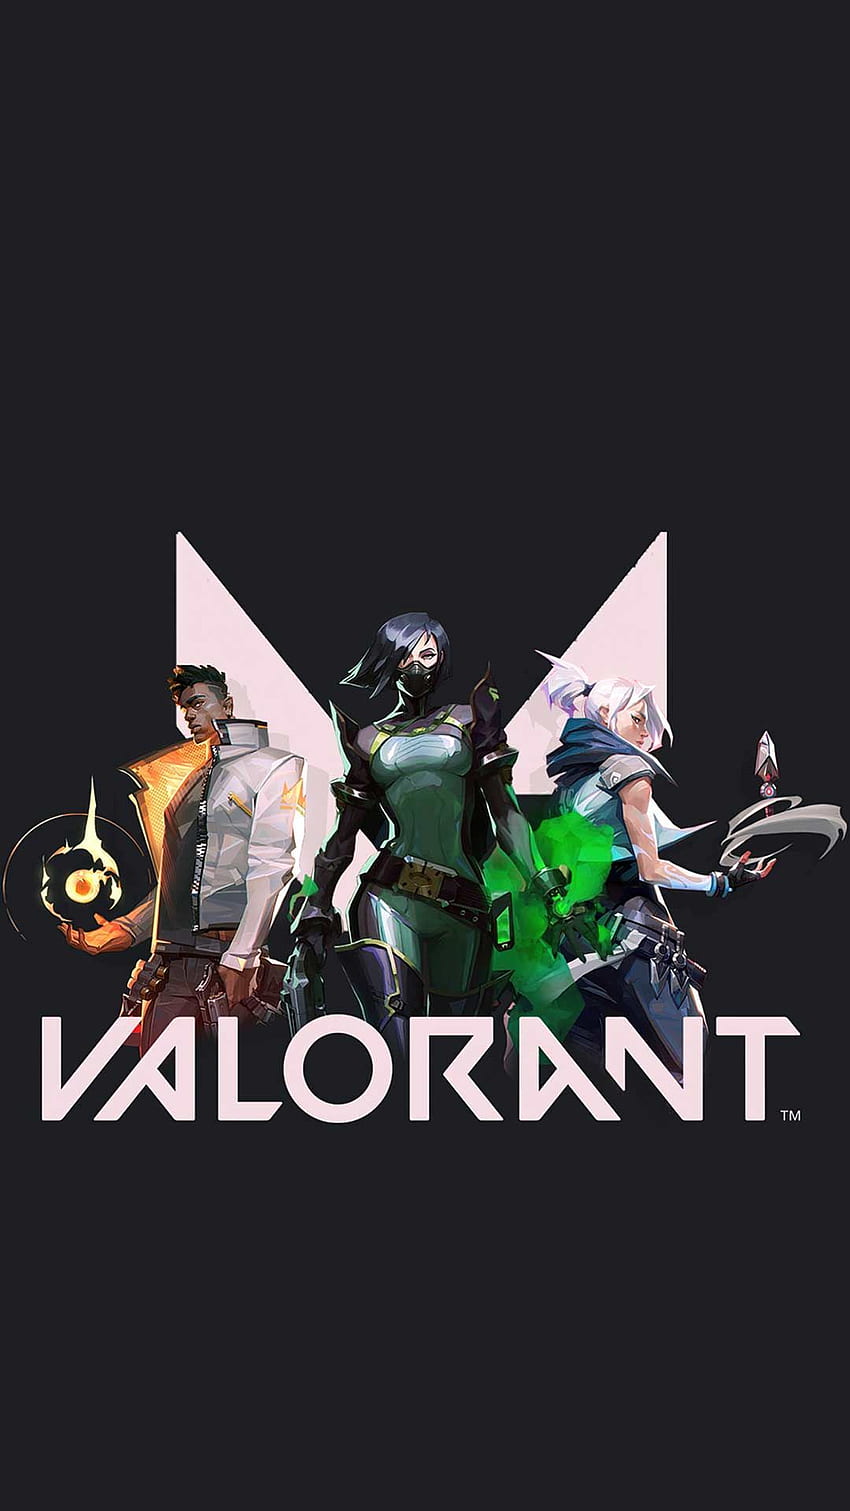 Valorant phone background Characters logo art Poster for iPhone android screen in 2020. Art logo, phone background, Poster art, Omen Gaming HD phone wallpaper